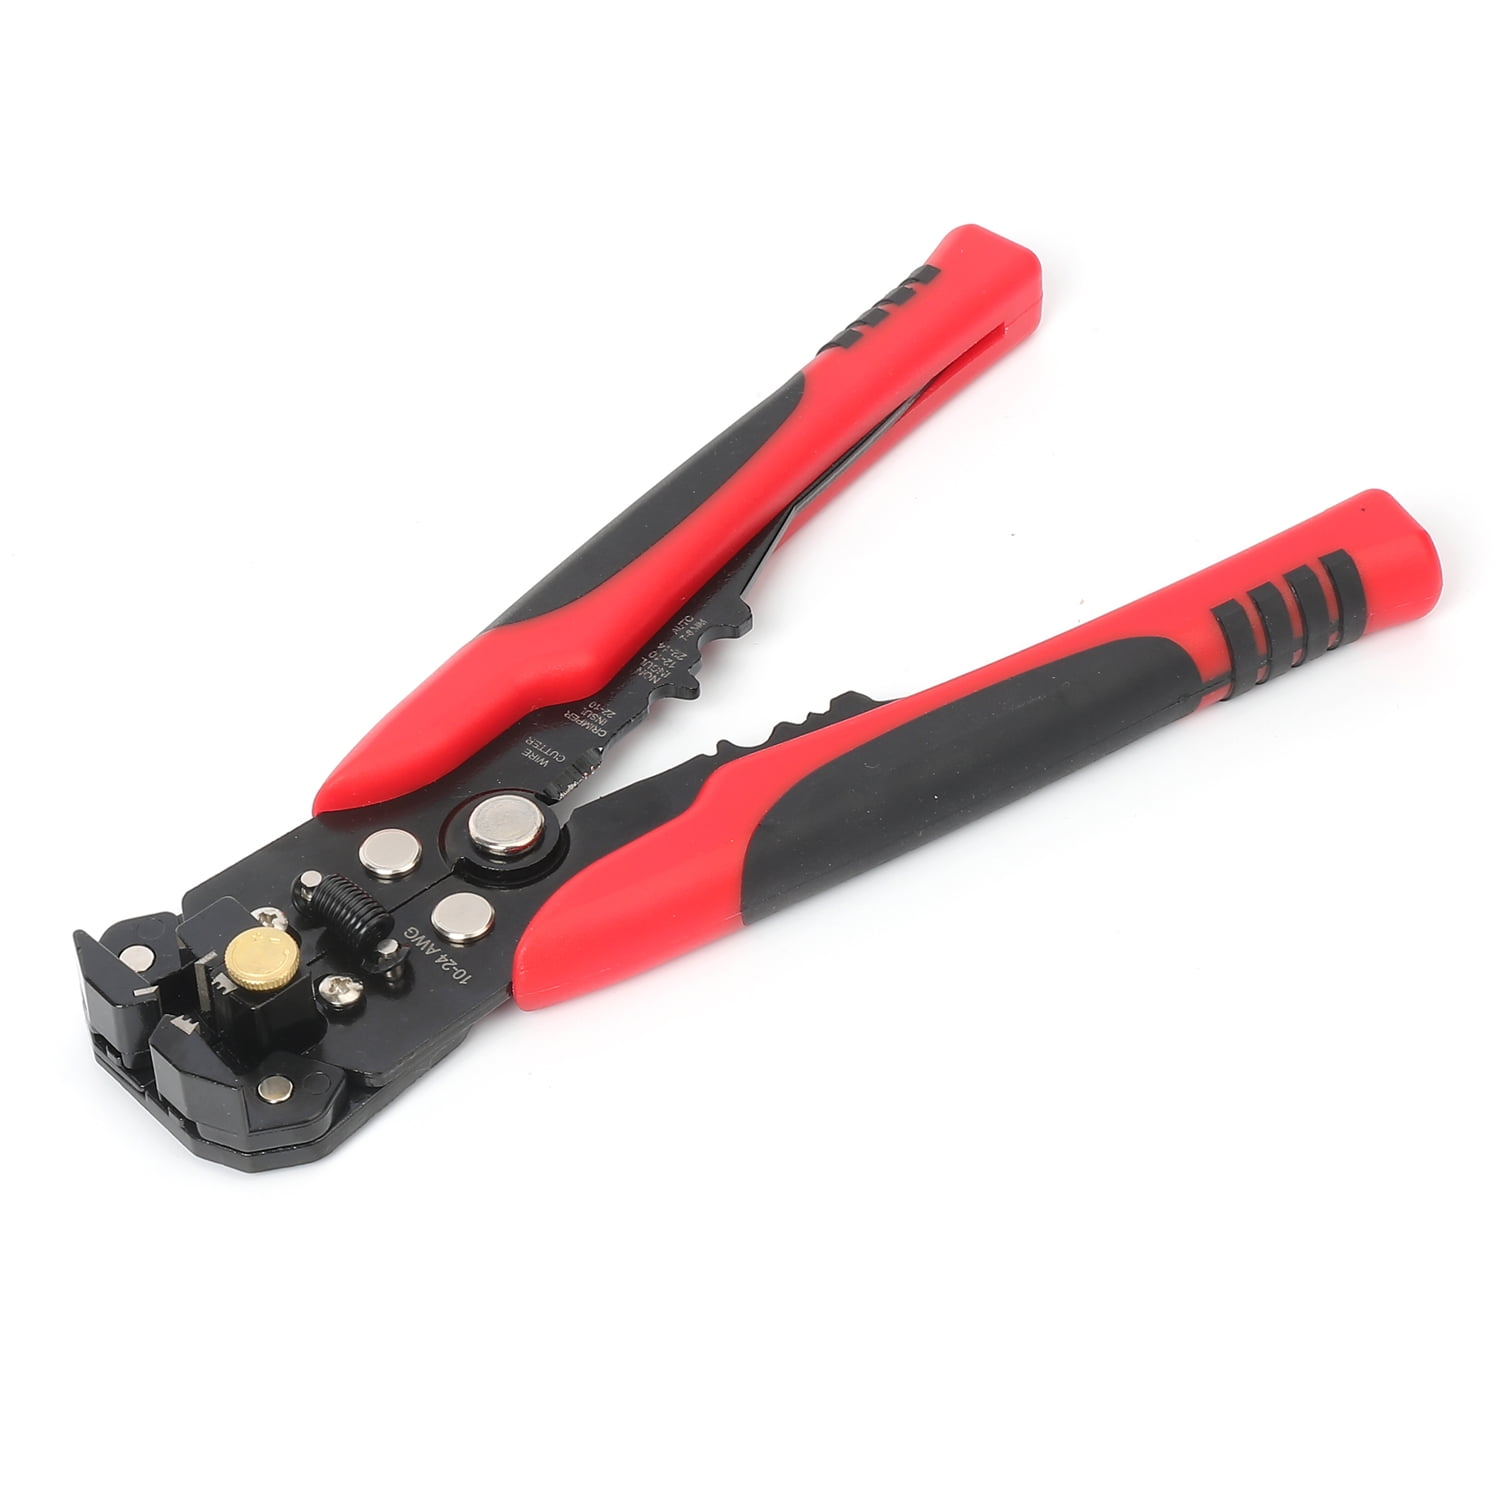 8" Self-Adjusting Insulation Wire Stripping tool with With Mini Screwdriver Set 